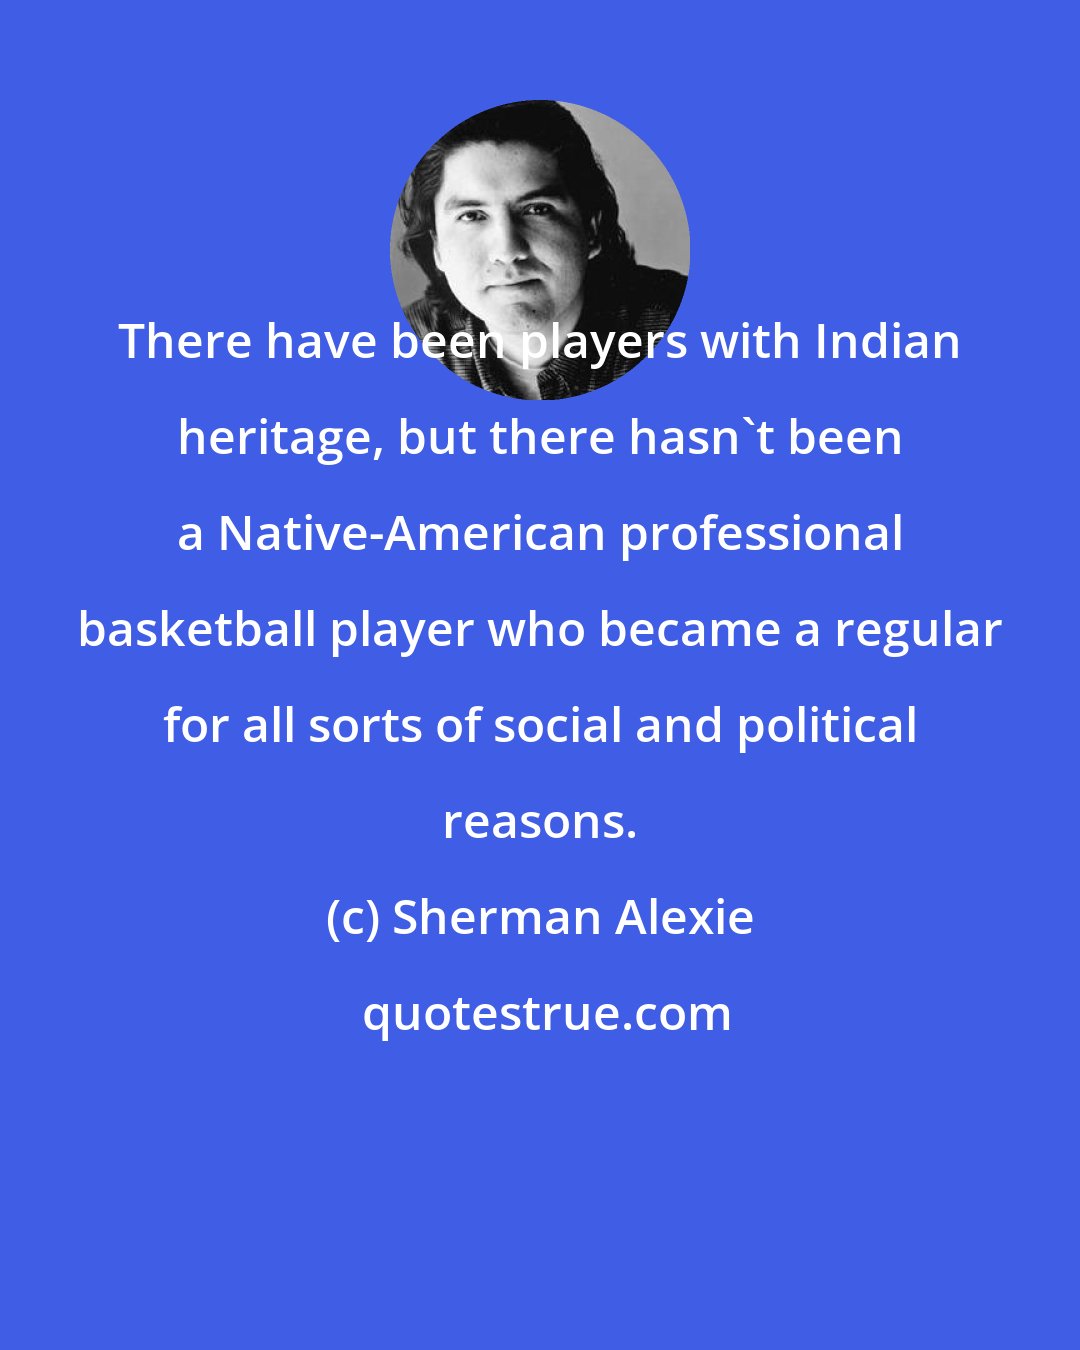 Sherman Alexie: There have been players with Indian heritage, but there hasn't been a Native-American professional basketball player who became a regular for all sorts of social and political reasons.